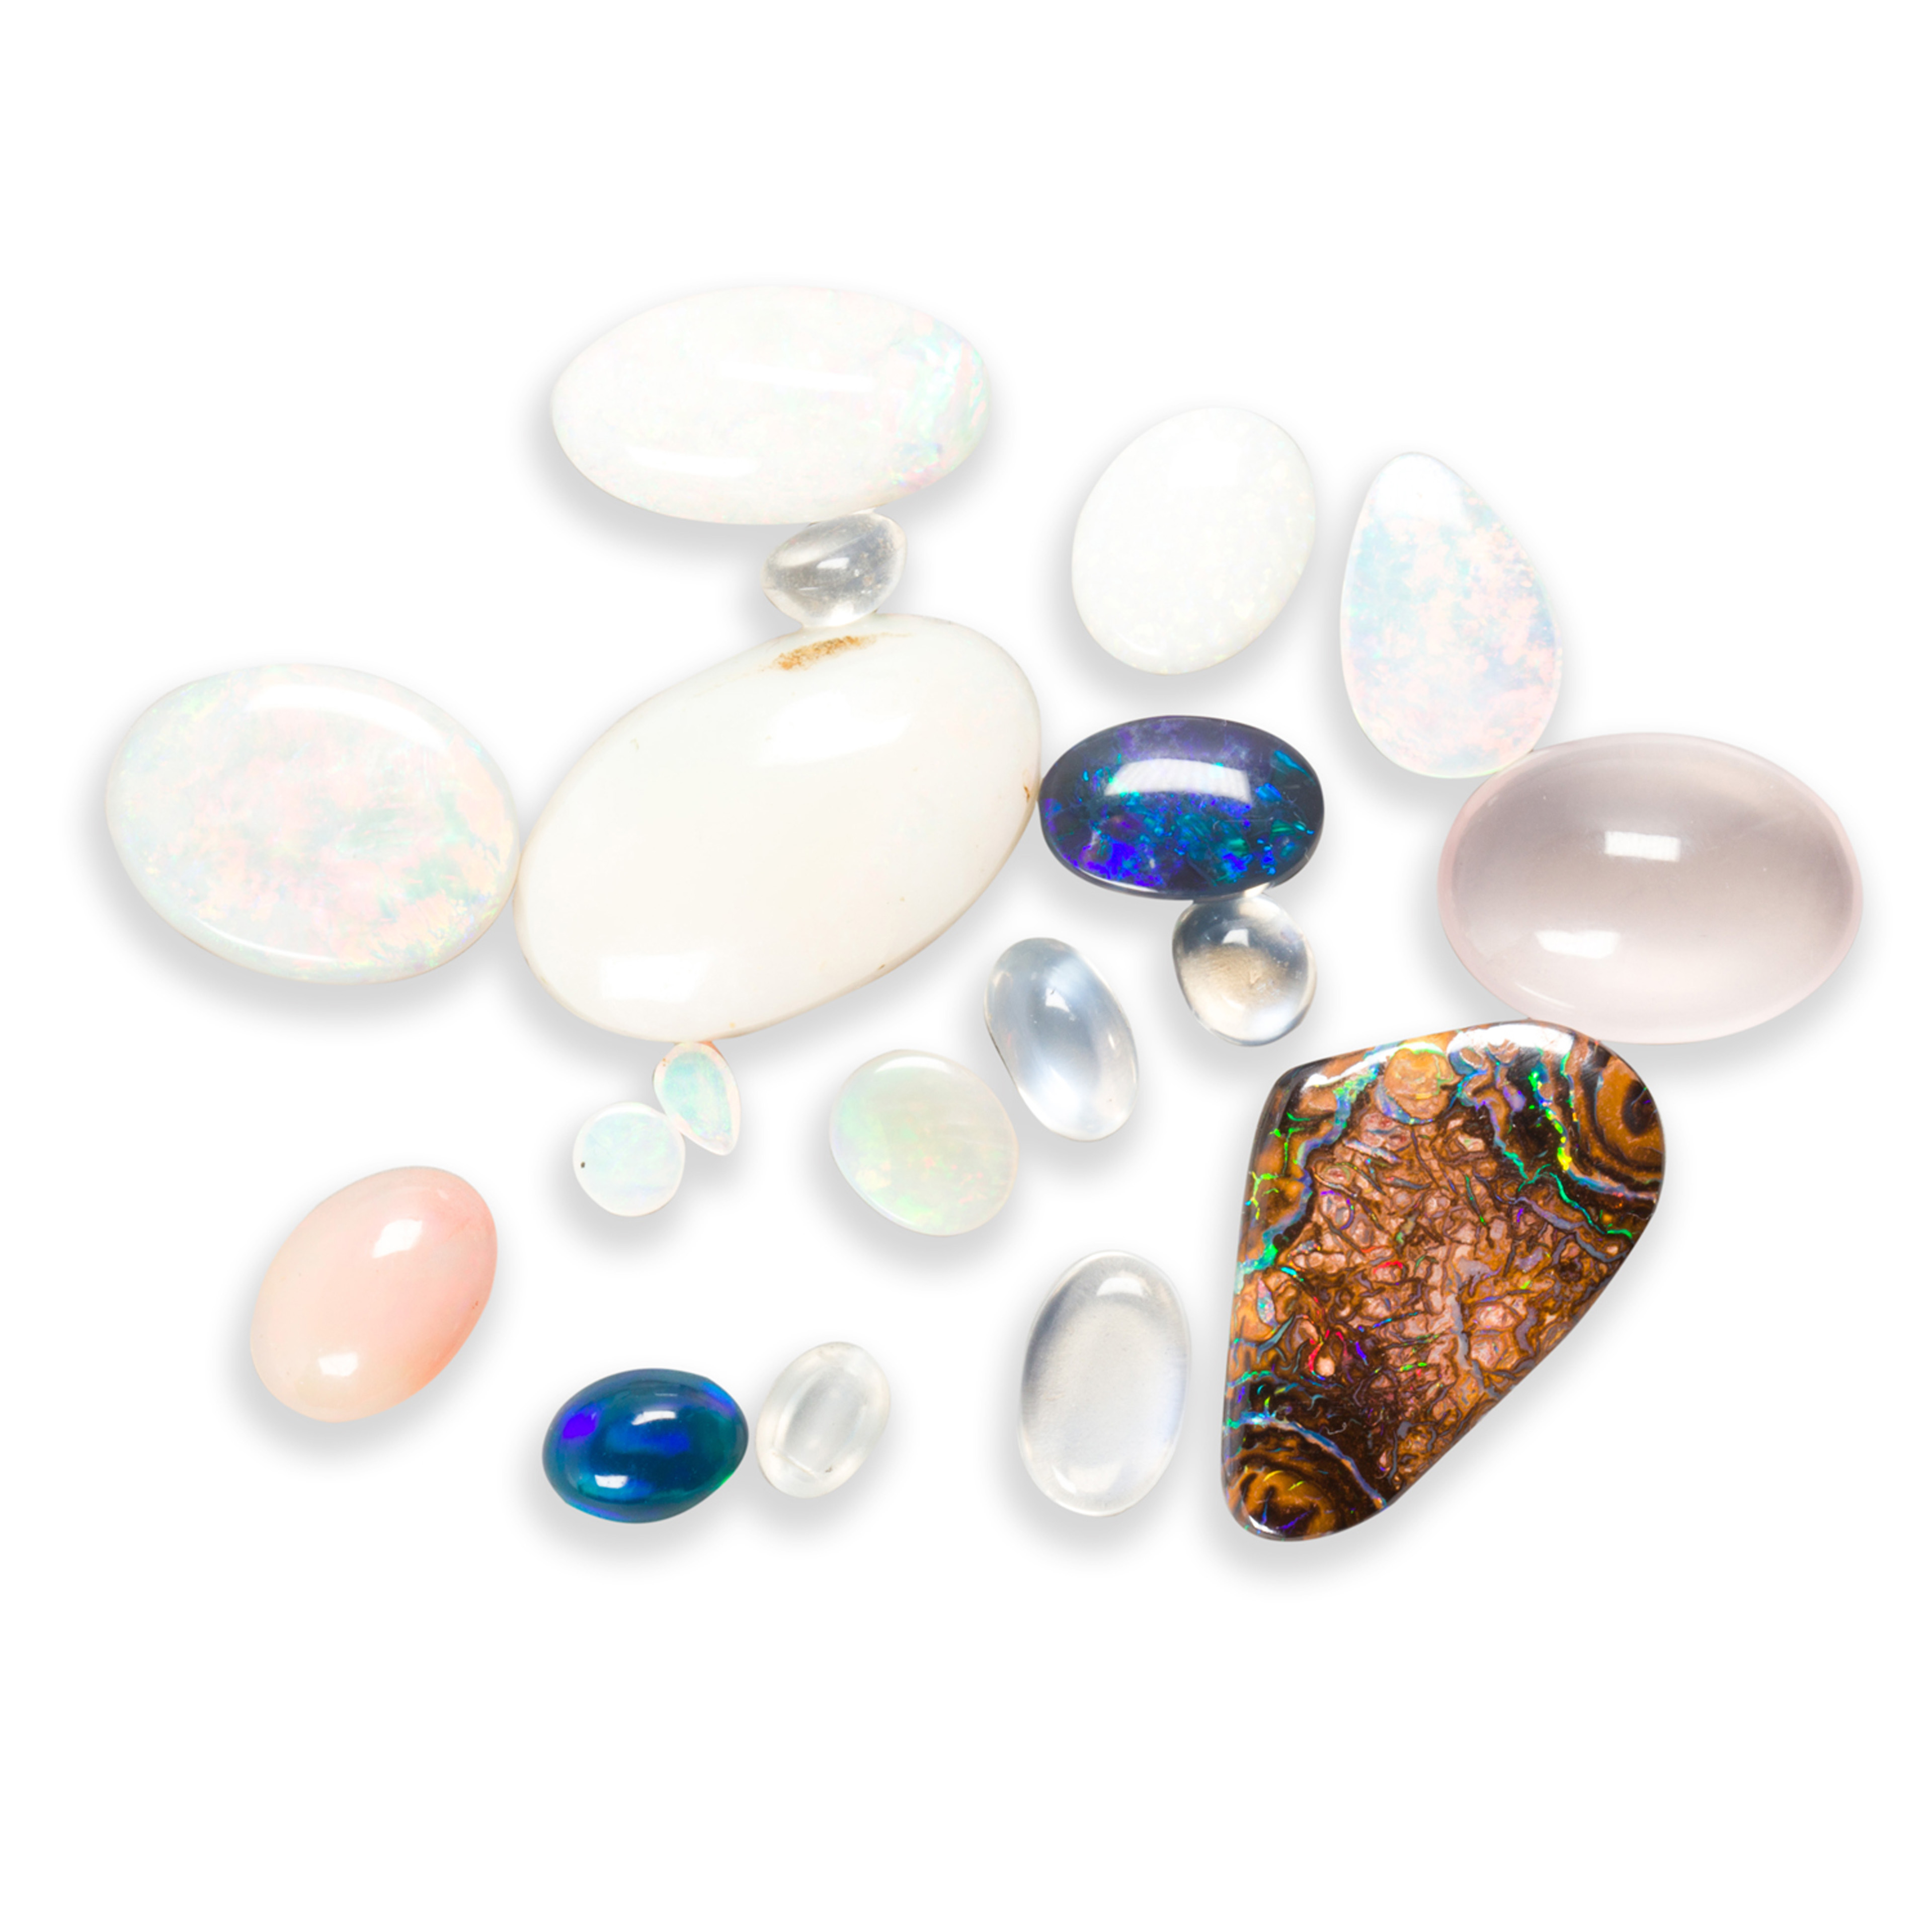 A GROUP OF UNMOUNTED OPALS OR MOONSTONES